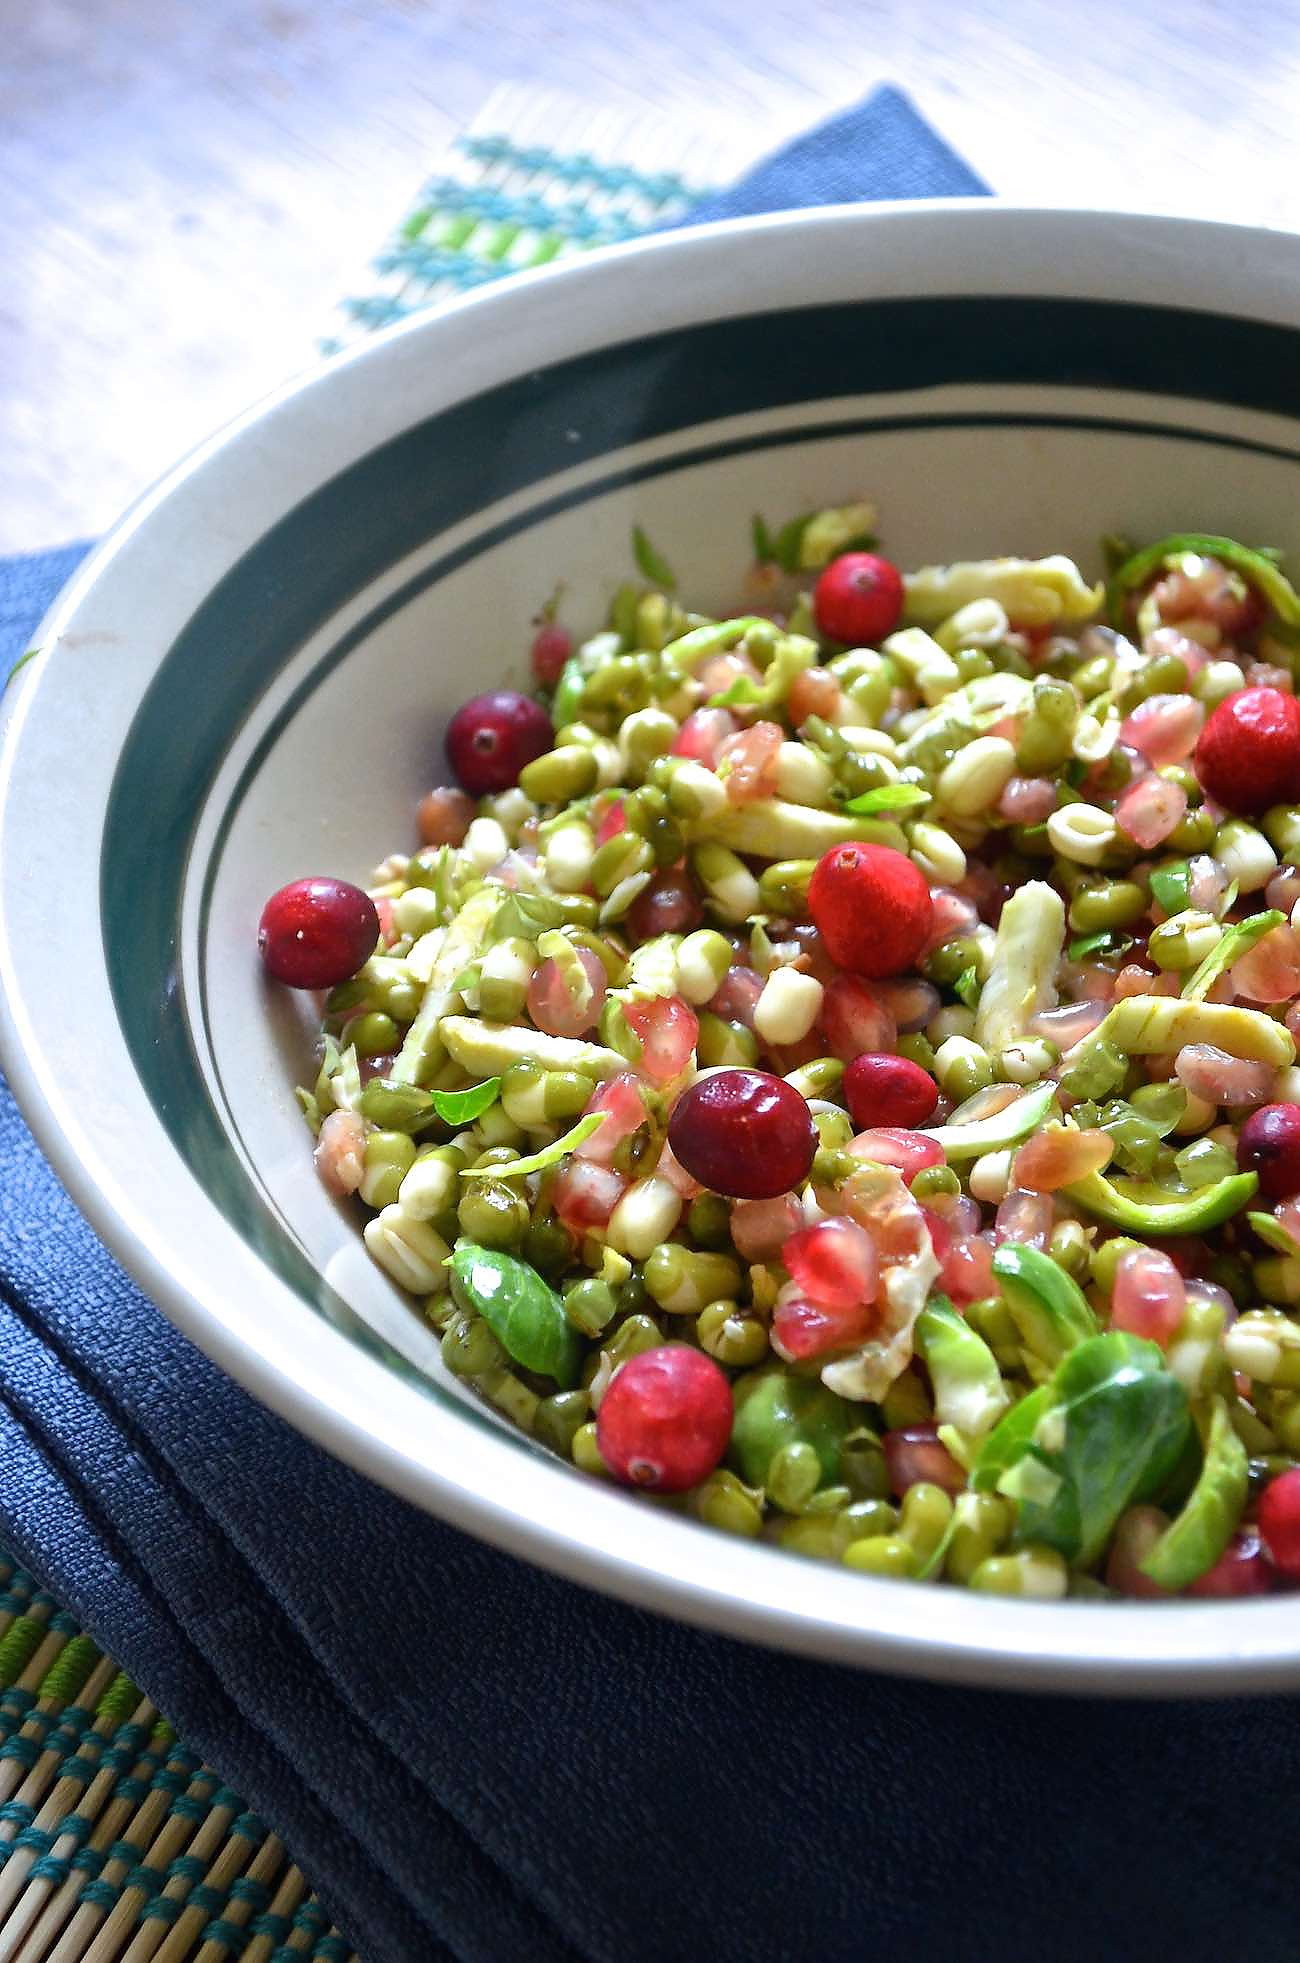 Mung Bean Sprouts Salad Recipe With Brussel Sprouts And Pomegranate By Archana S Kitchen